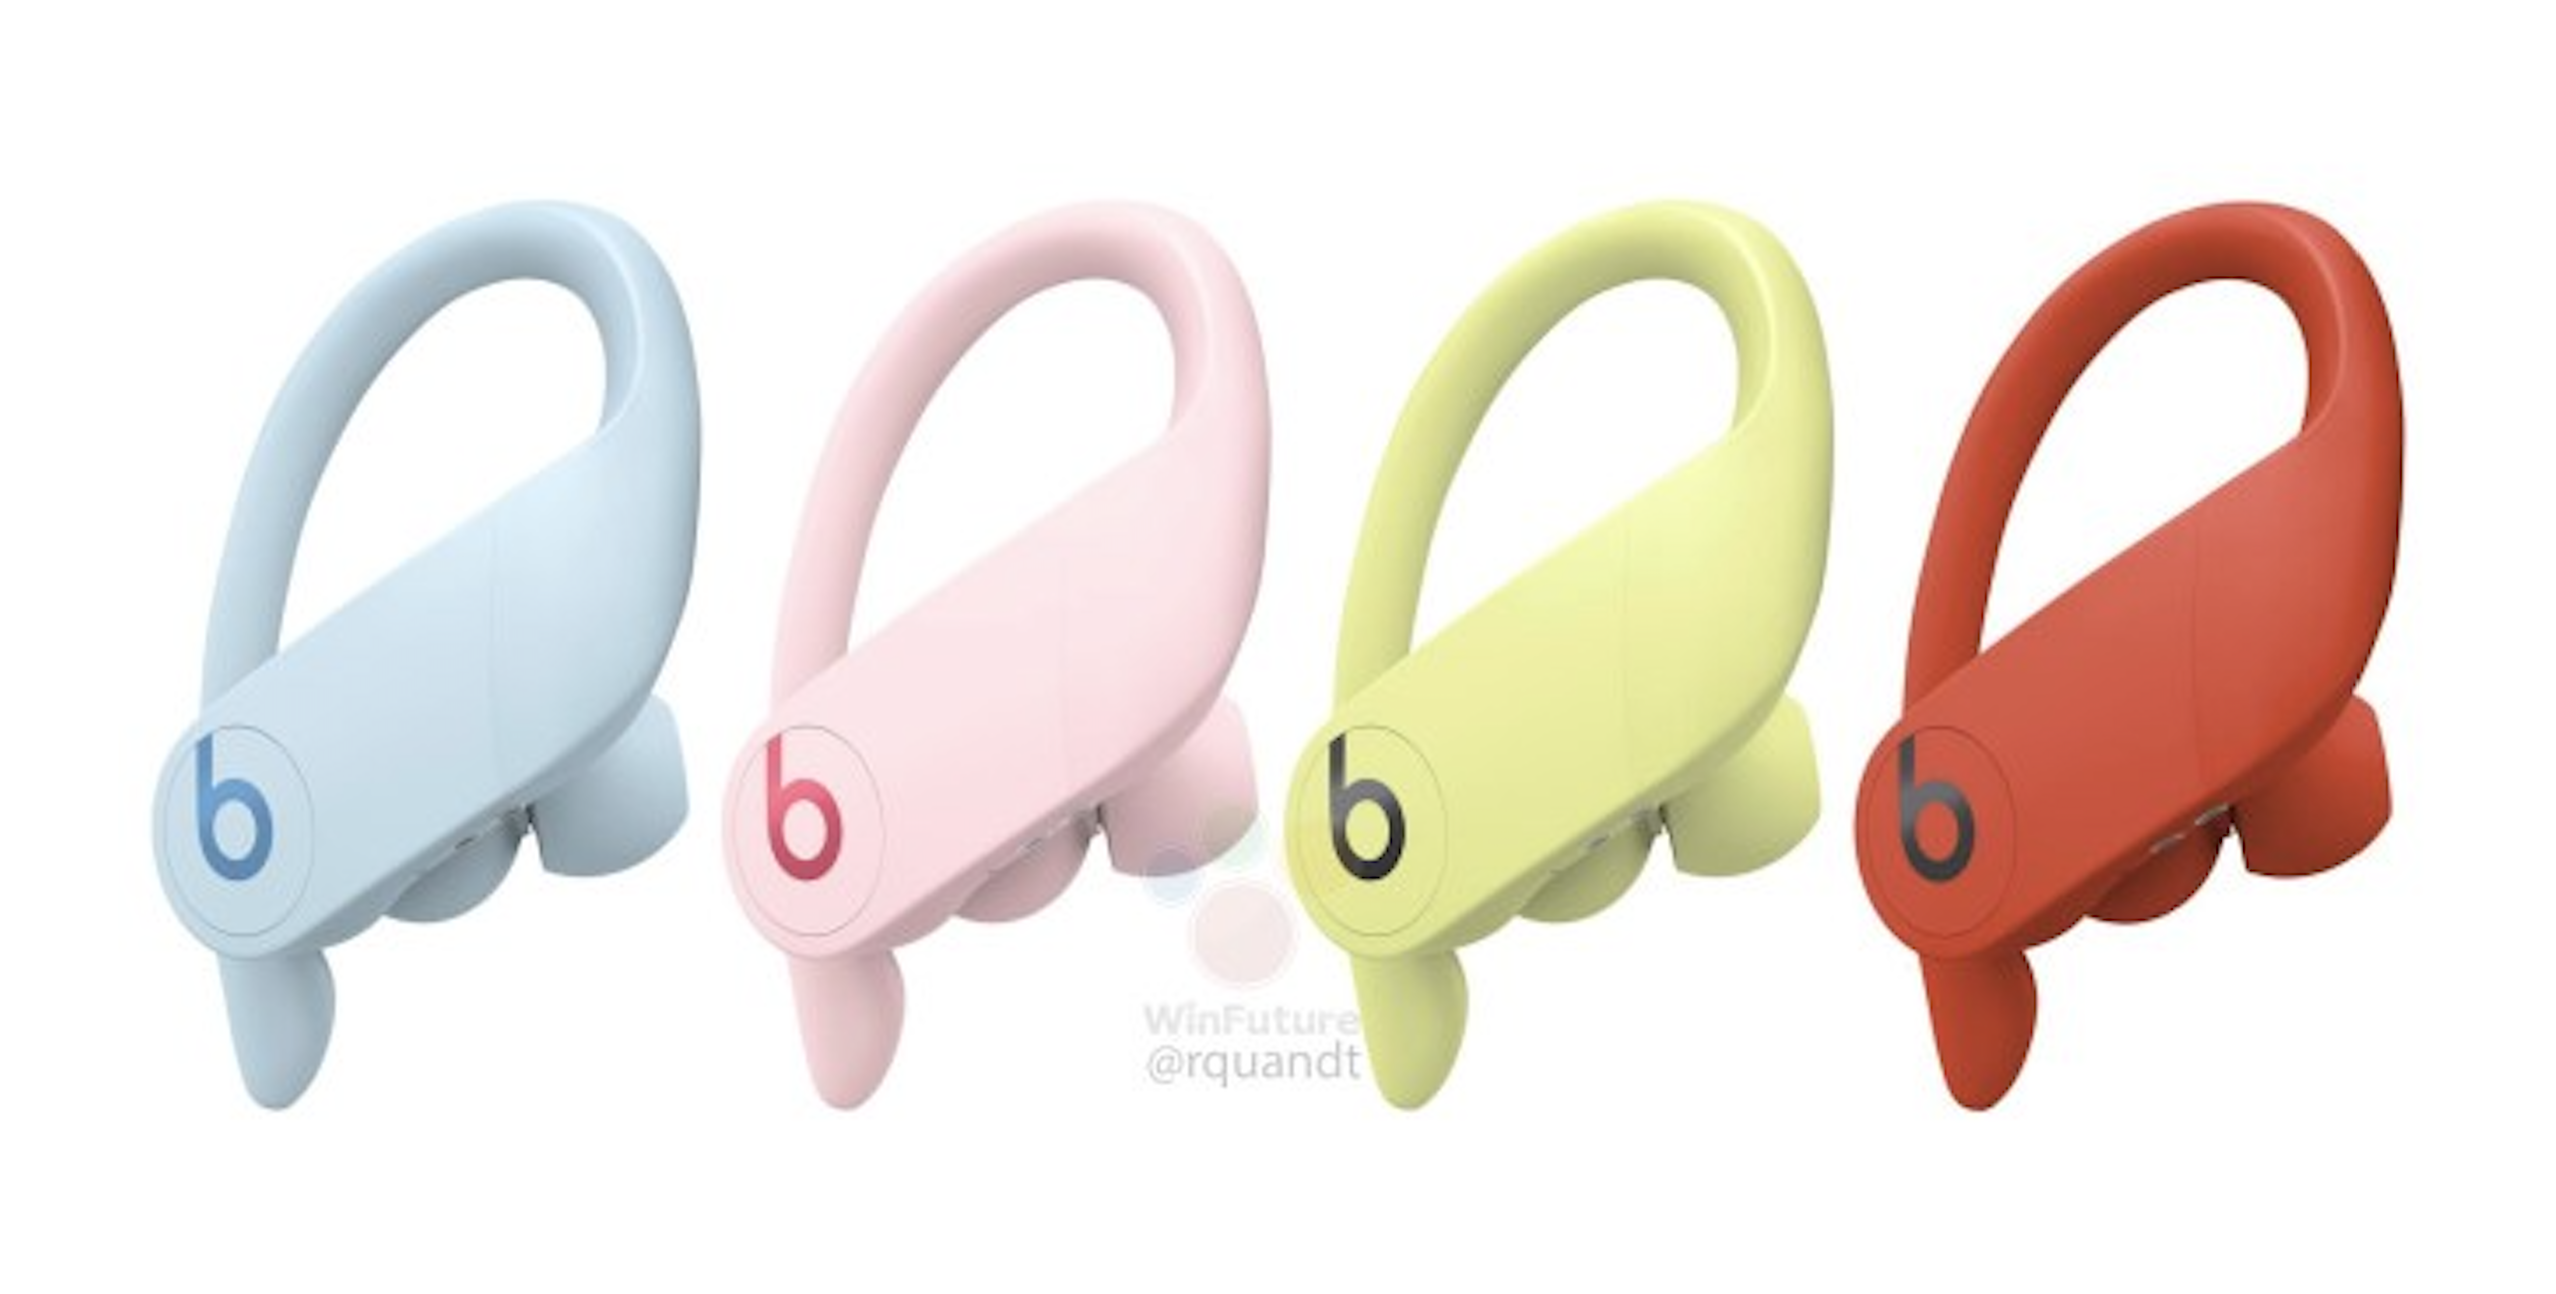 Powerbeats Pro likely gaining four new 